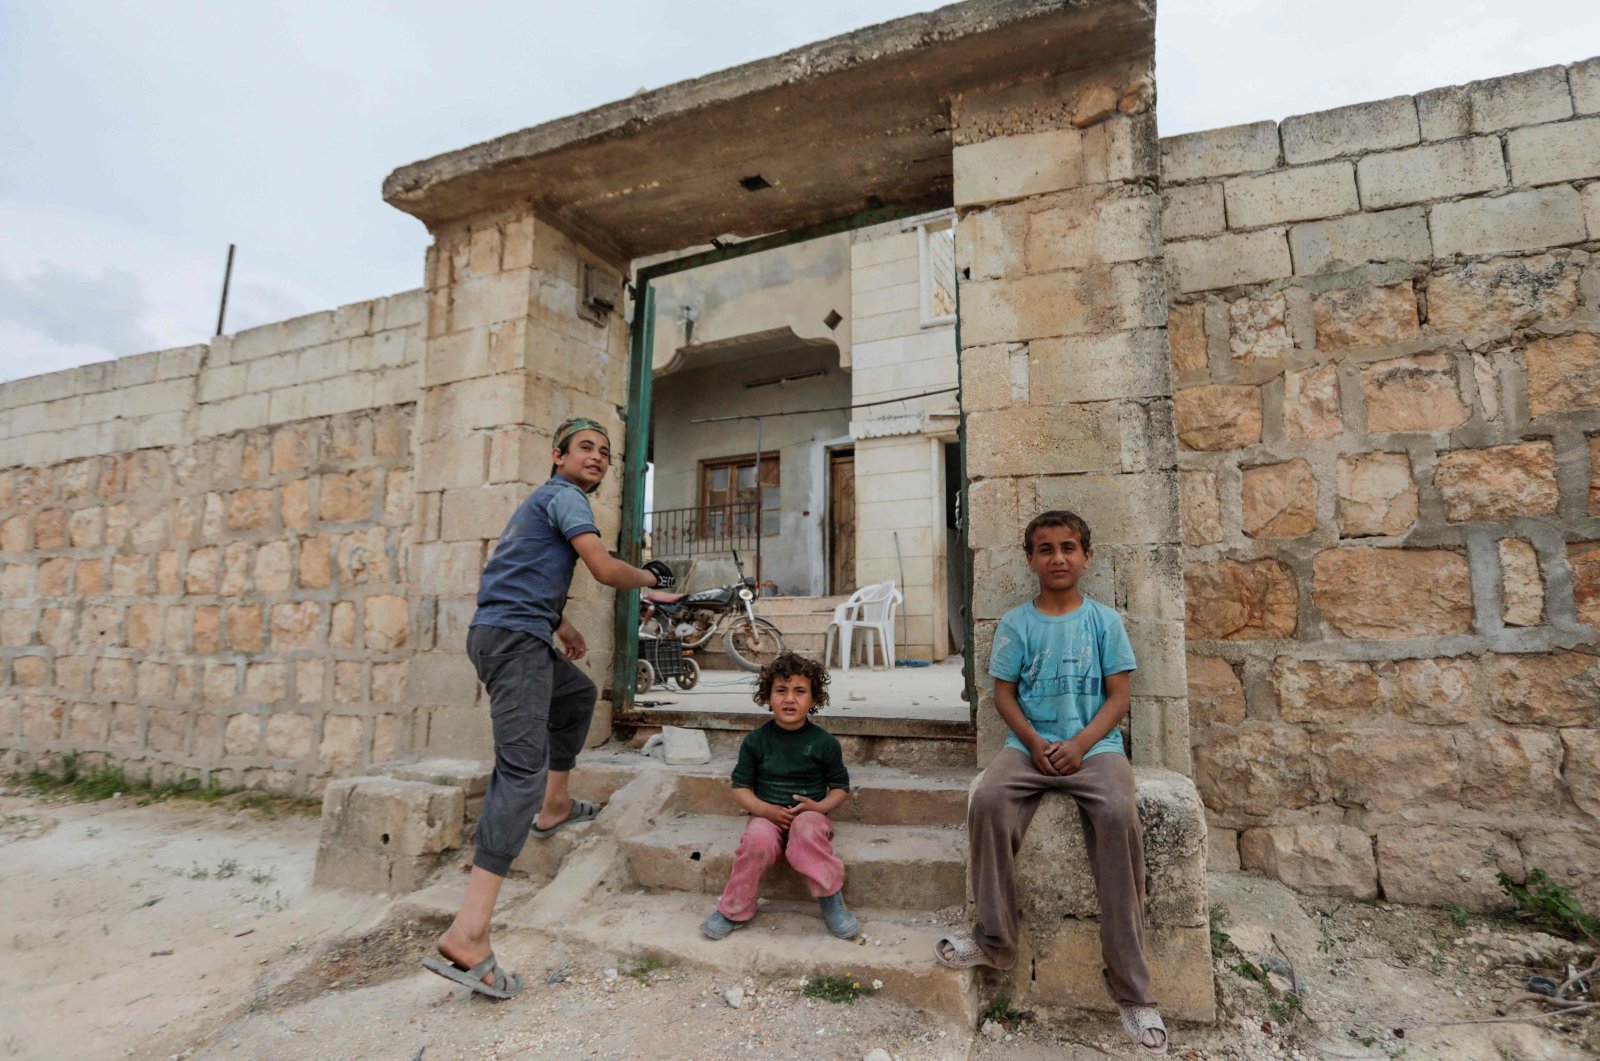 Syrian children whose family decided to return home, rest by the entrance as they clean the rubble from their house's yard in al-Nayrab, a village ravaged by regime forces bombardment near the M4 strategic highway, in Syria's northwestern Idlib province, May 3, 2020. (AFP Photo)